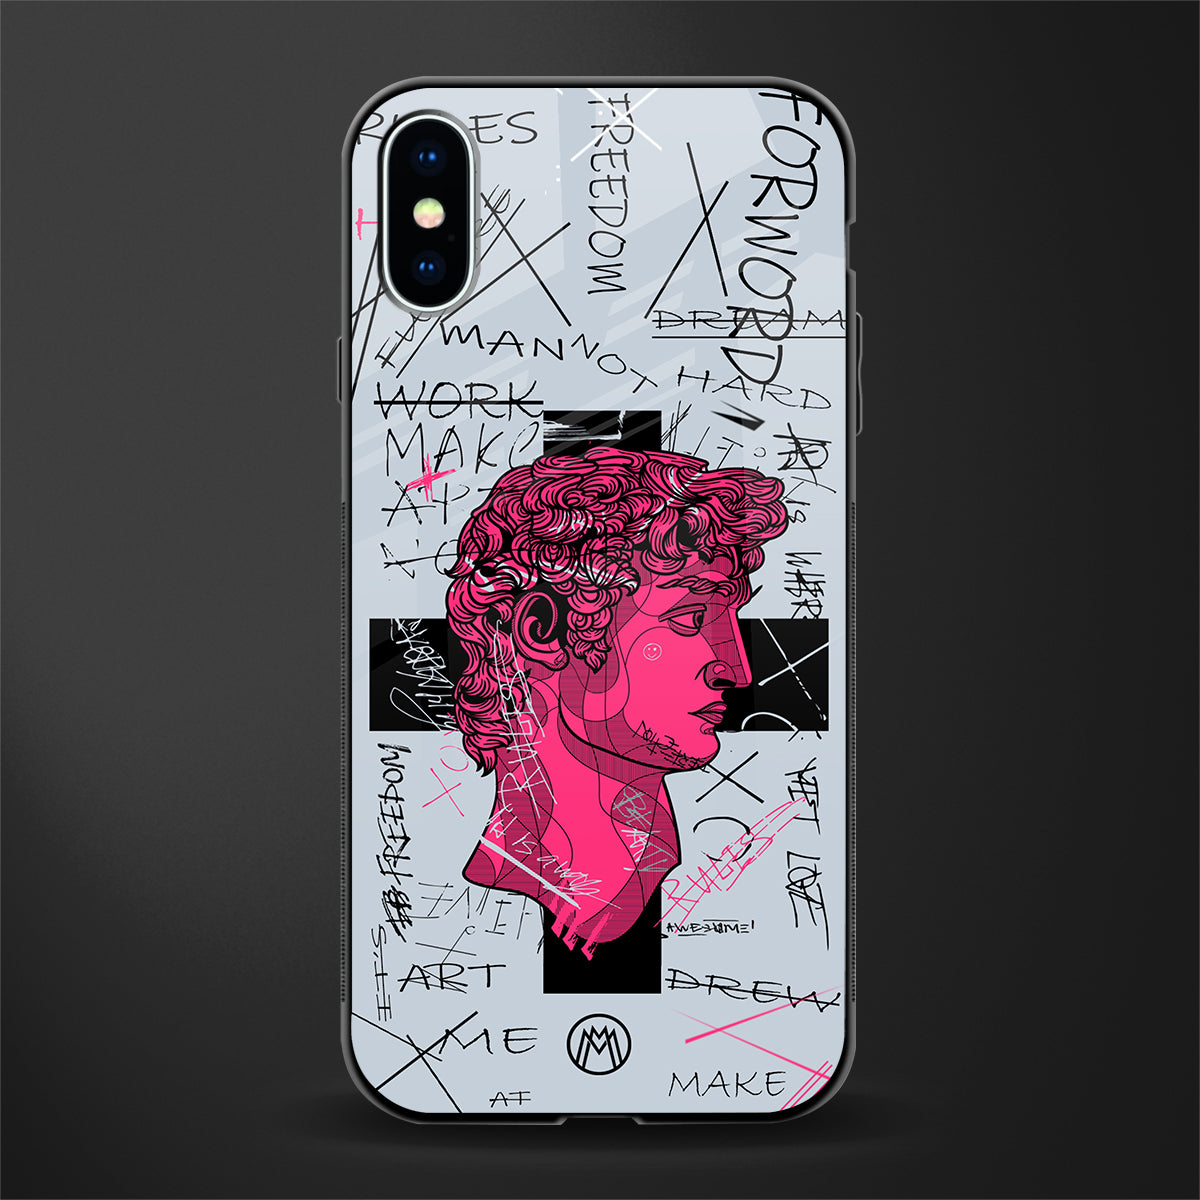 lost in reality david glass case for iphone x image